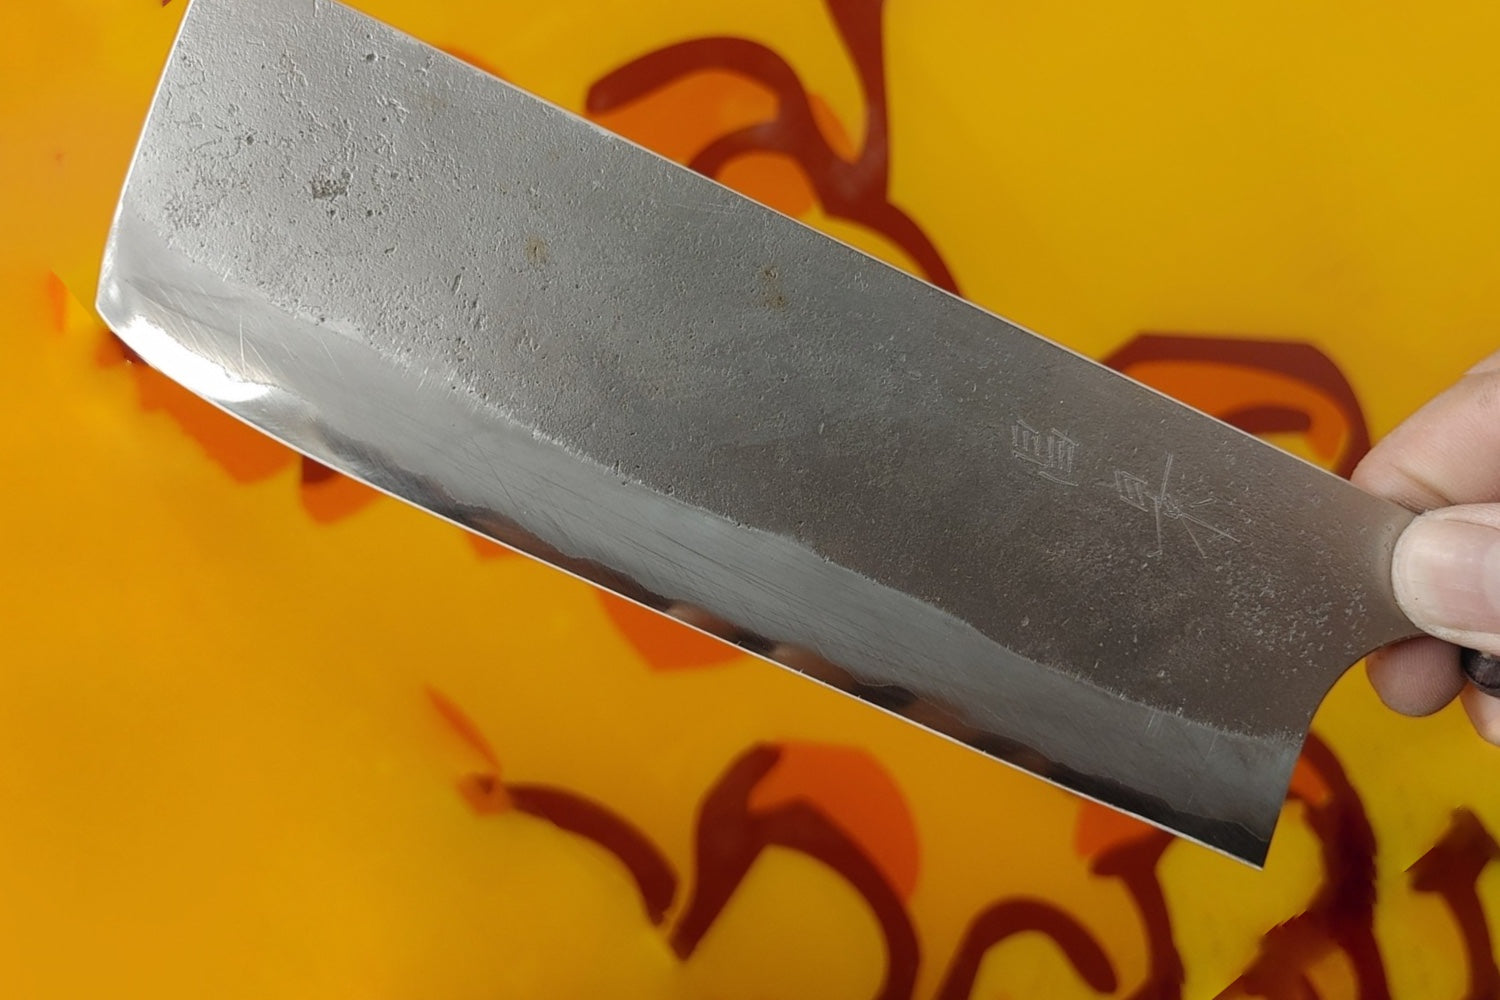 Knife Repairs - chips, tips, and bends - In store service